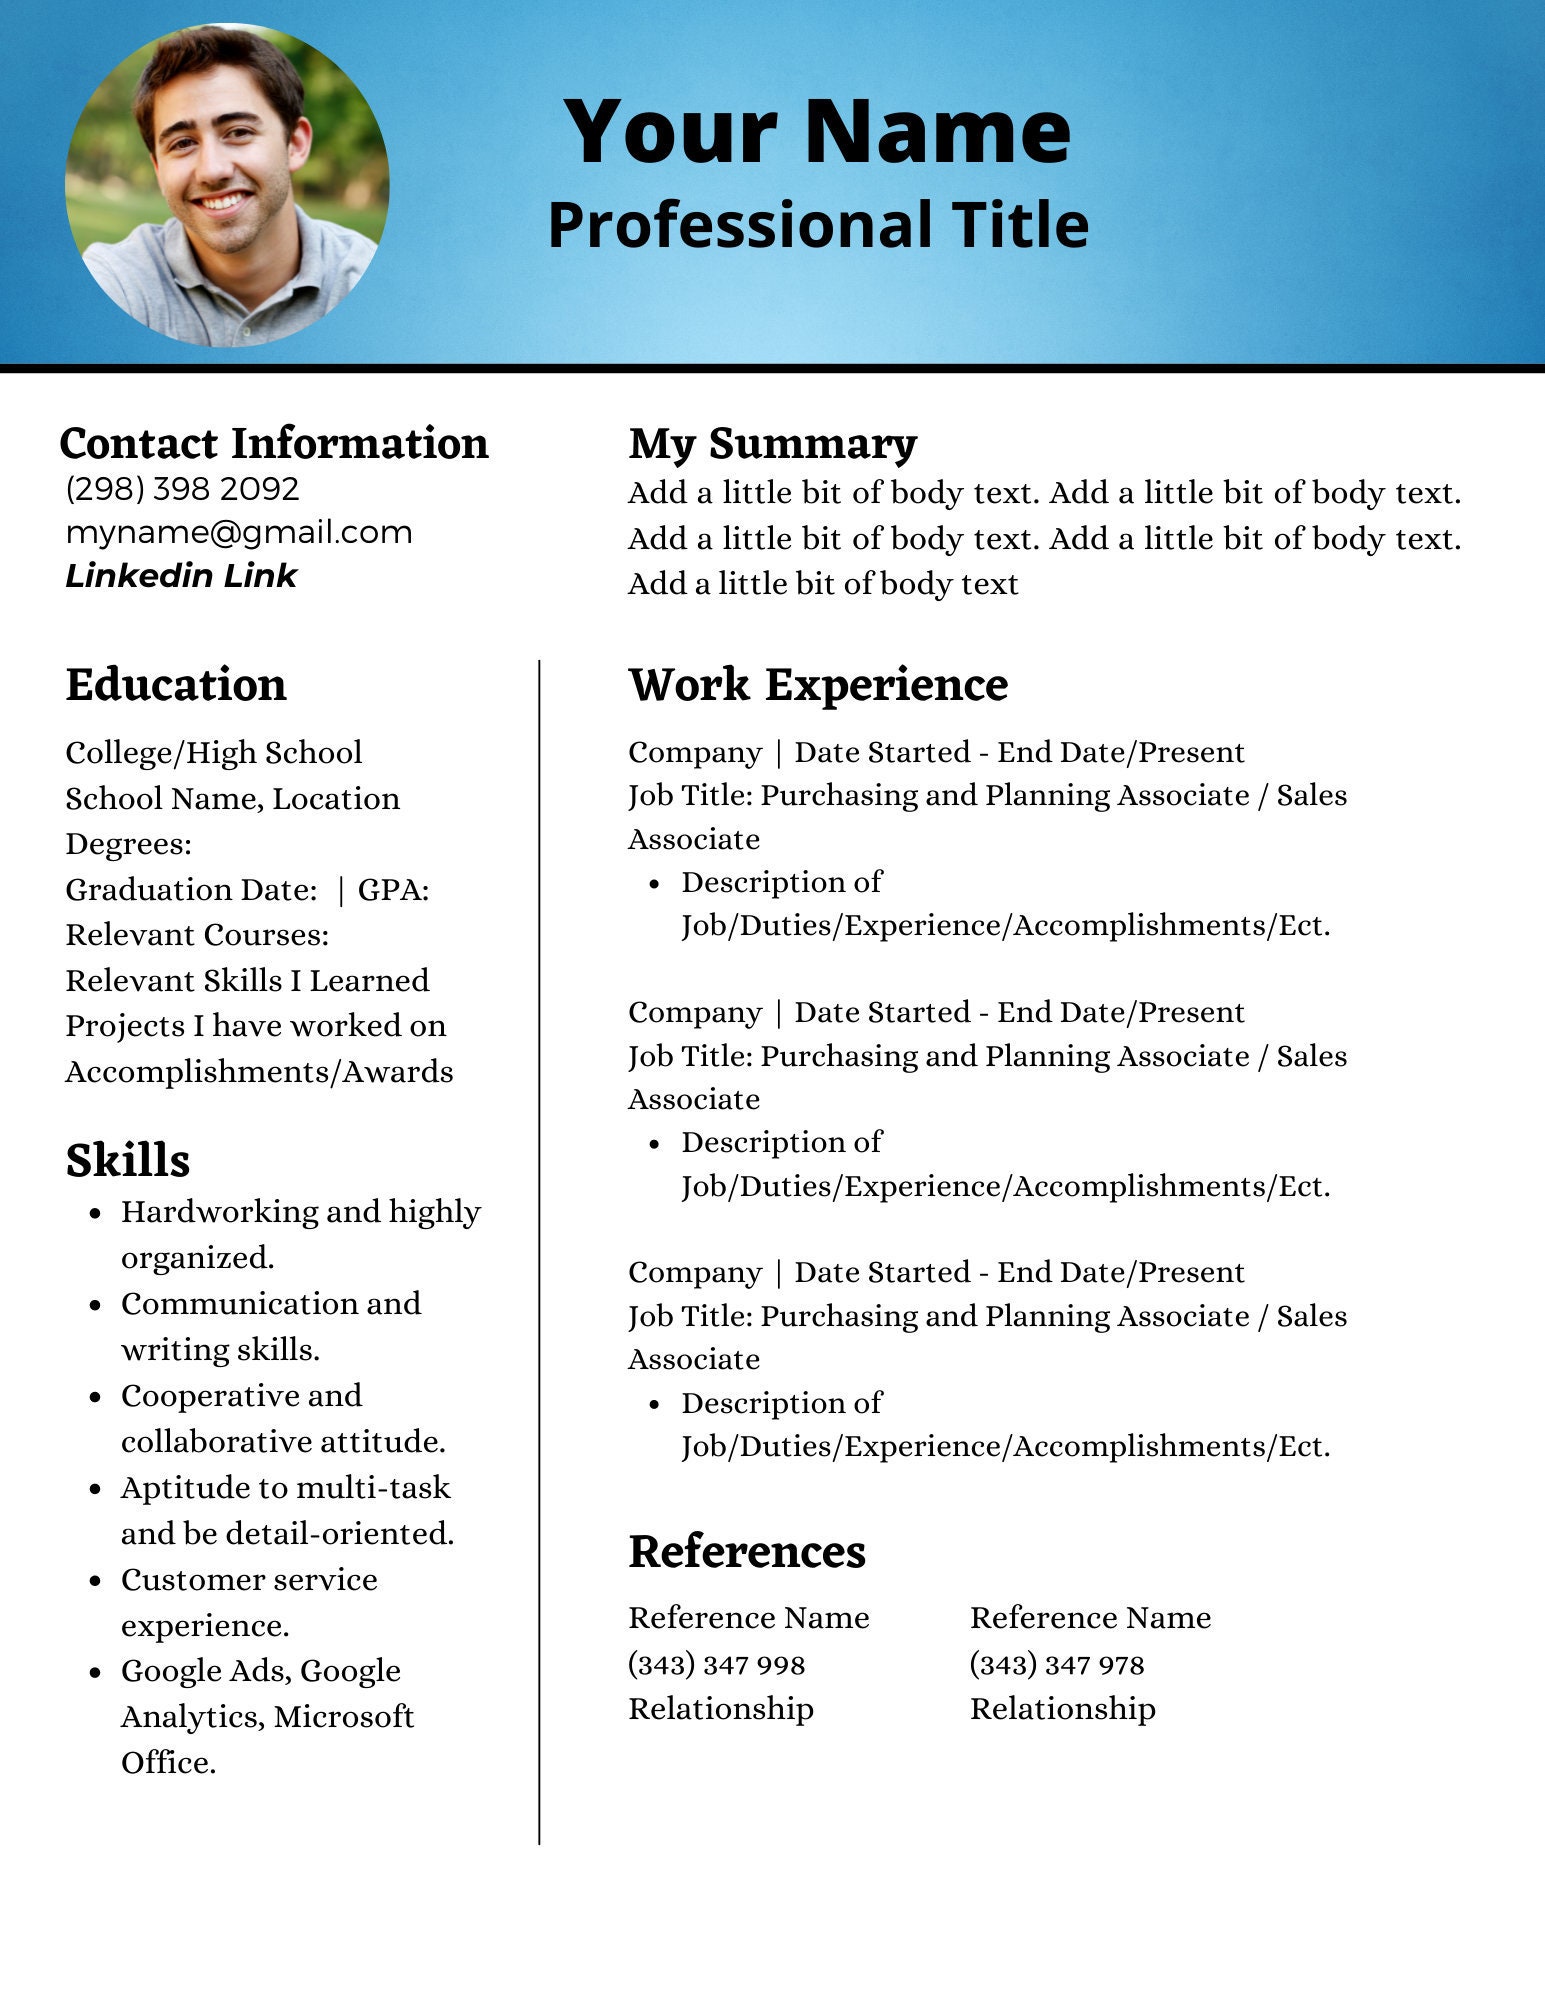 presentations in a resume